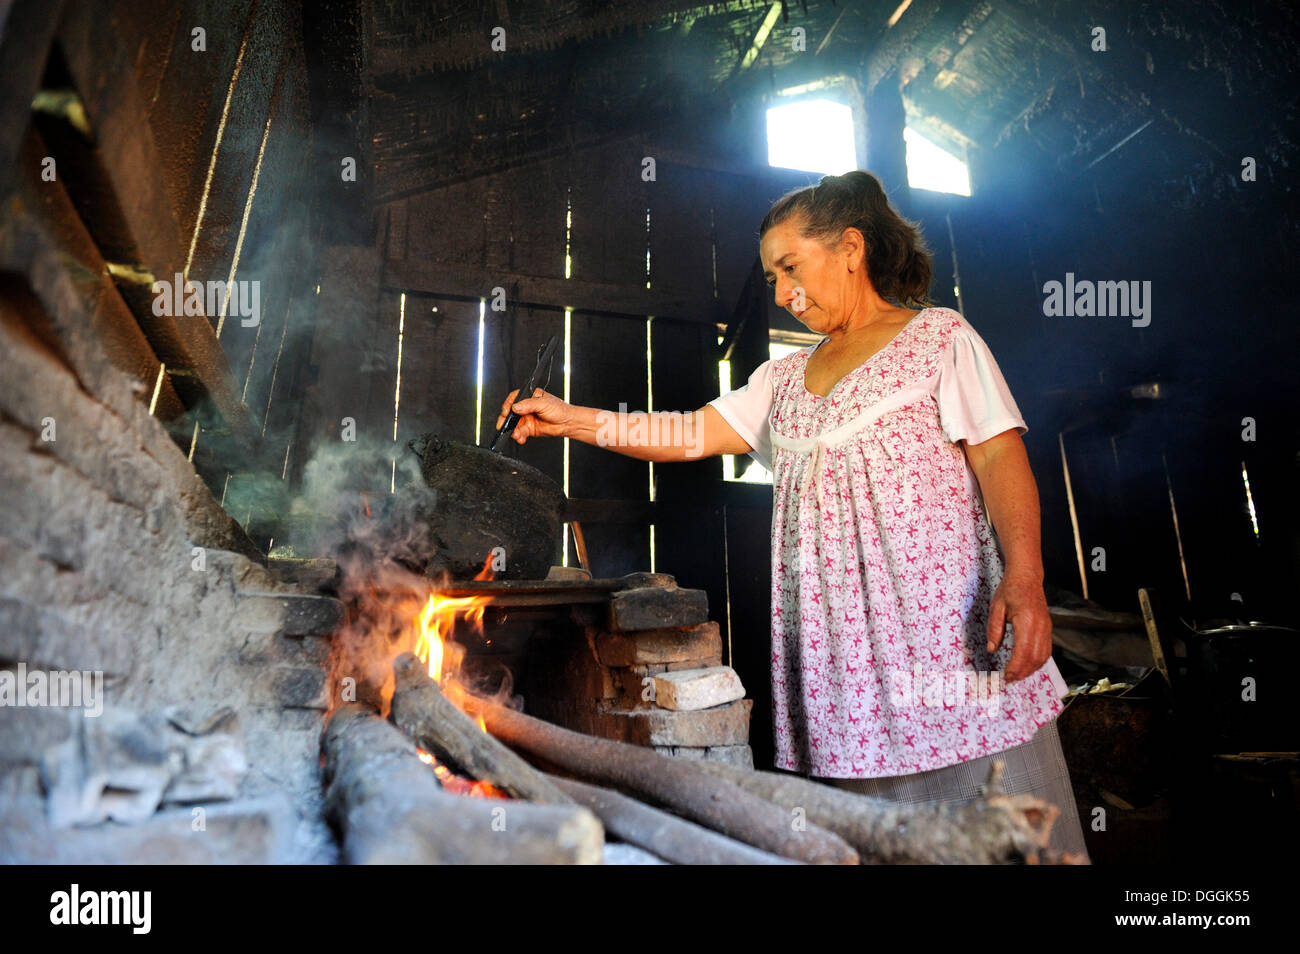 Elderly woman in a basic kitchen cooking on an open fire, Carayao, Caaguazú Department, Paraguay Stock Photo